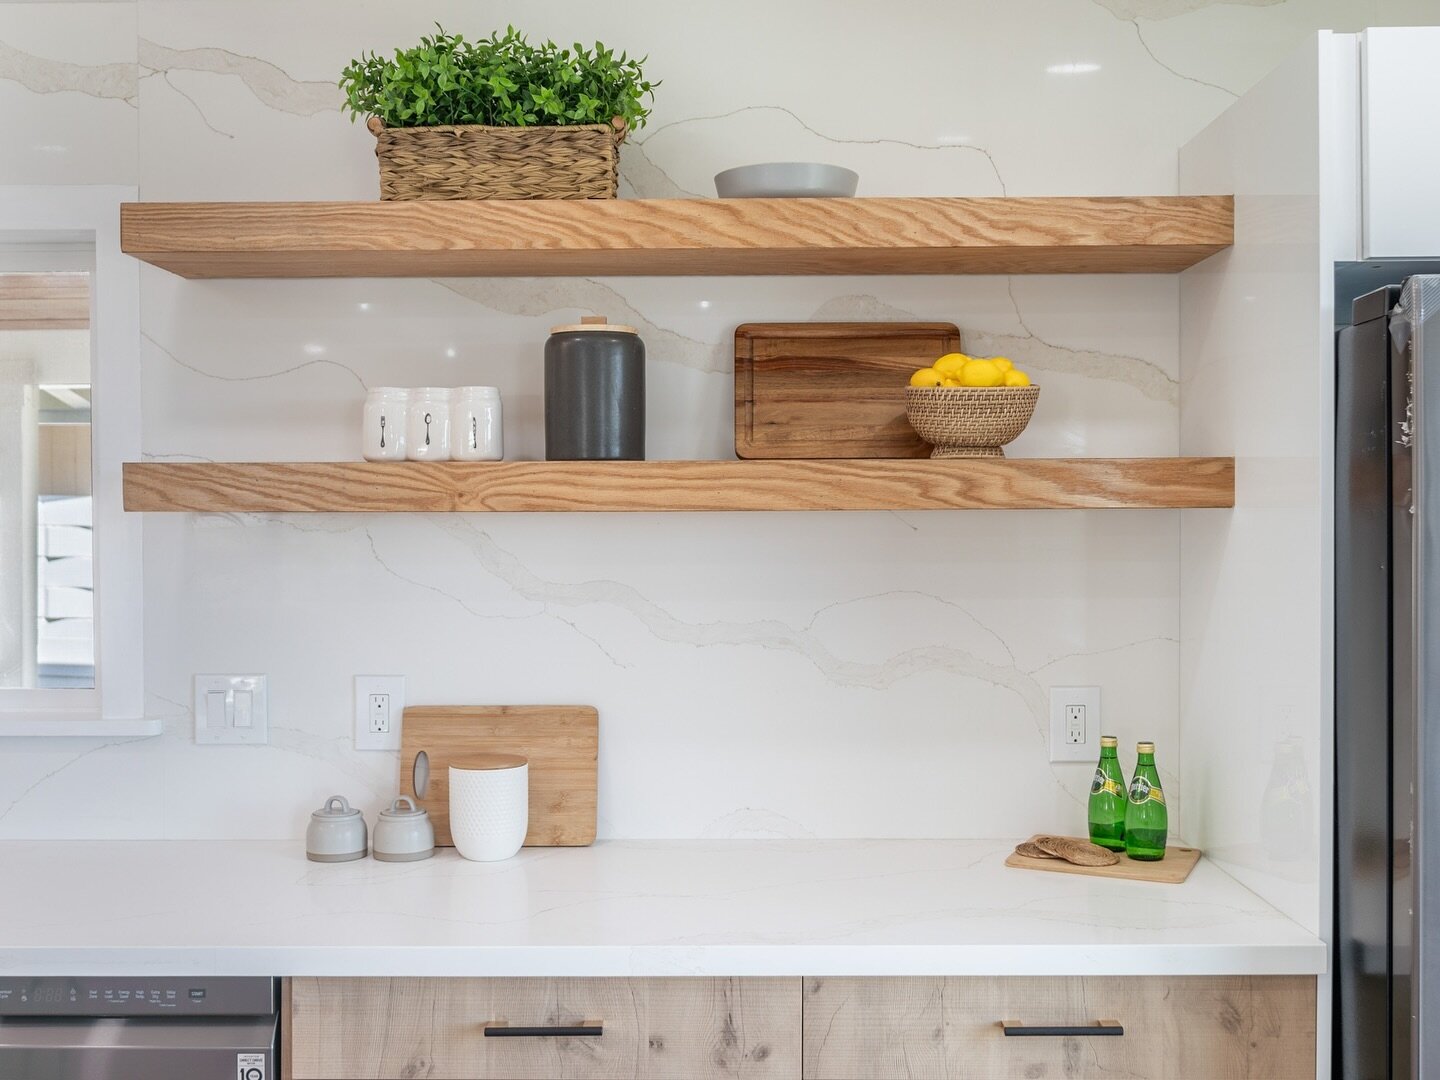 Fresh week, fresh space. 🌱 What&rsquo;s the first thing you&rsquo;re organizing in your kitchen to kick-start the week?

#yourhomemyoasis